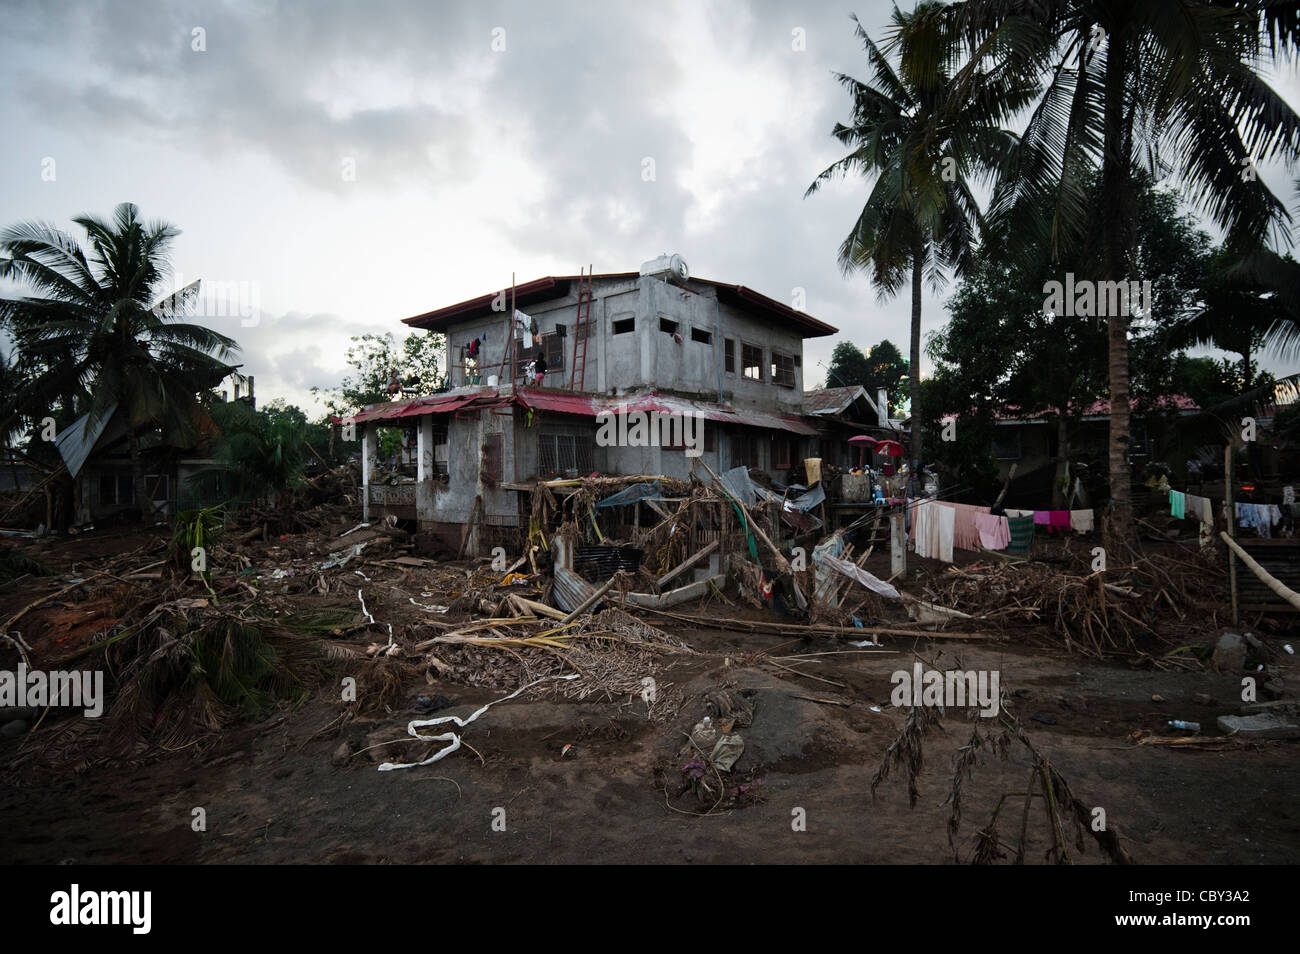 Flood aftermath in Cagayan De Oro, Philippines. Stock Photo